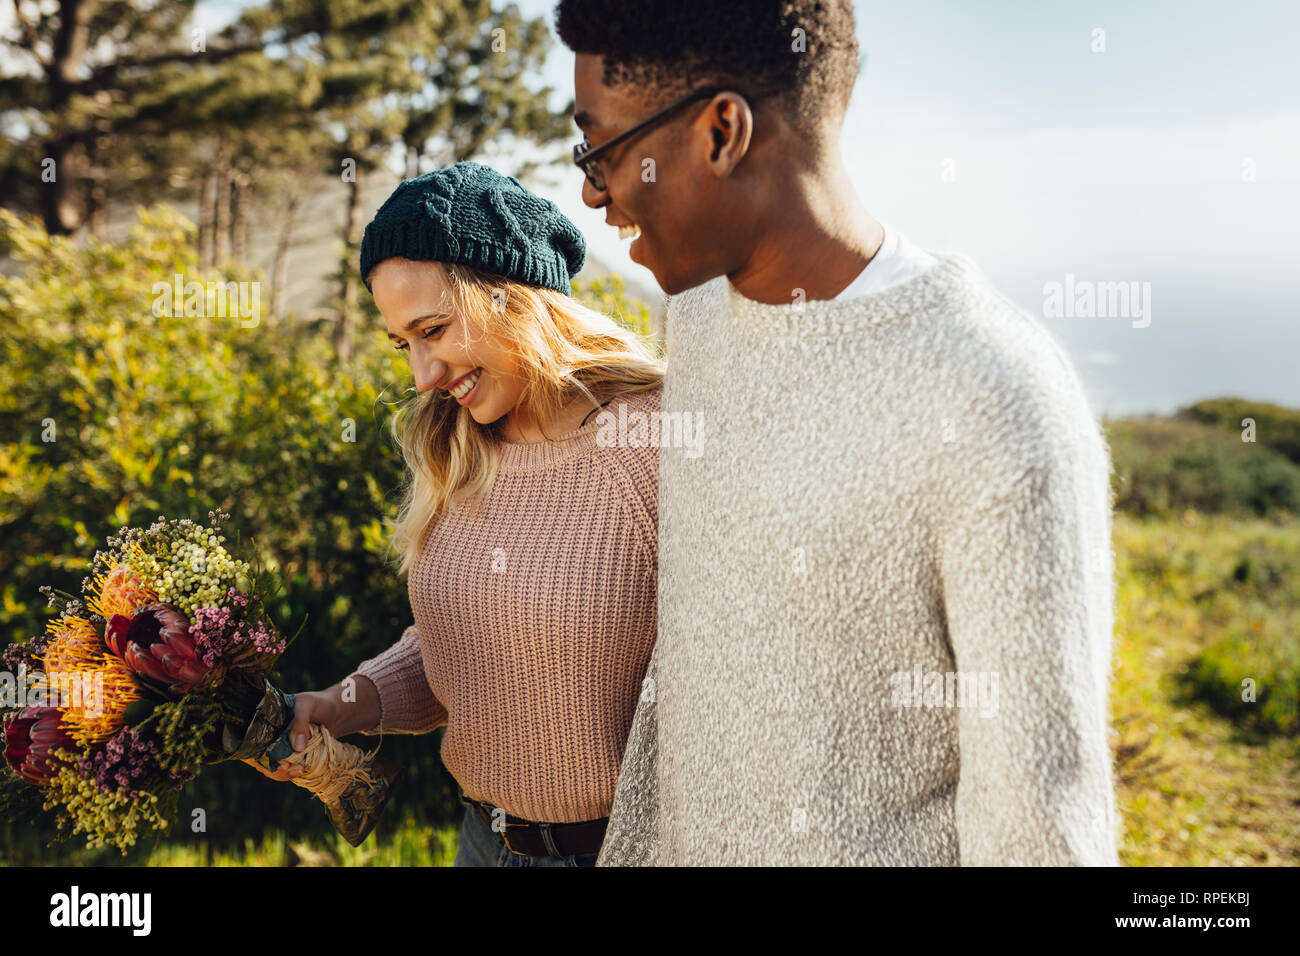 Smiling woman holding flower walking with her boyfriend outdoors. Couple in love walking together outdoors. Stock Photo